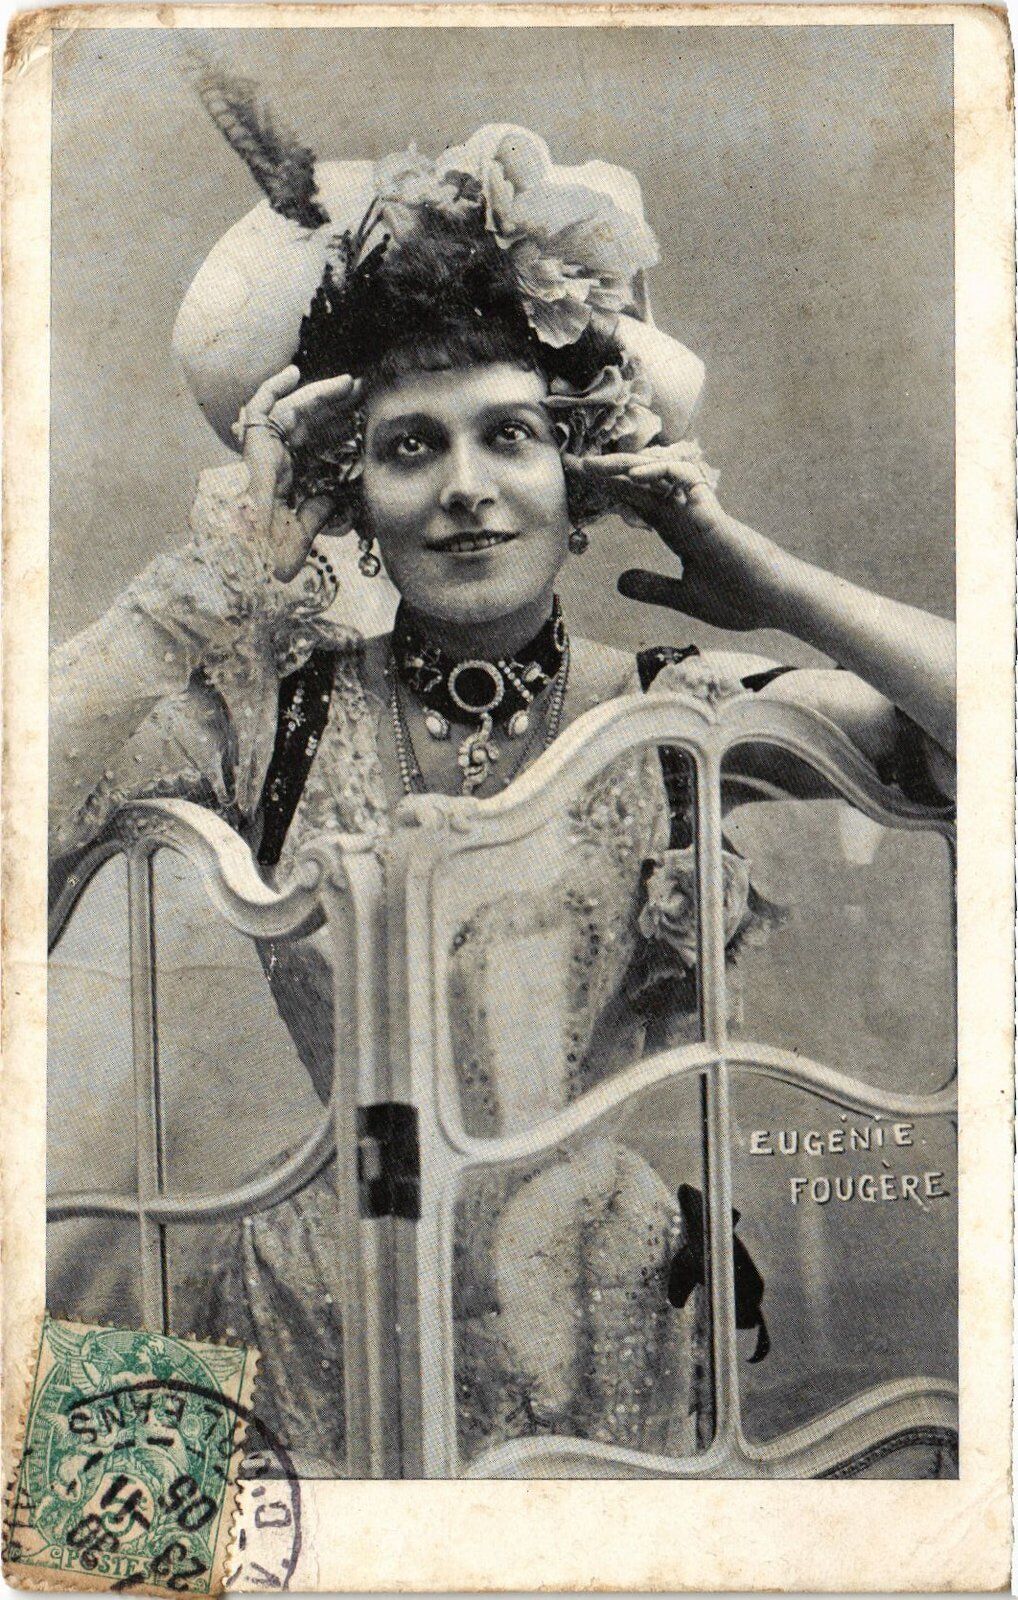 PC EUGENIE FOUGERE THEATRE STAR (a38814)